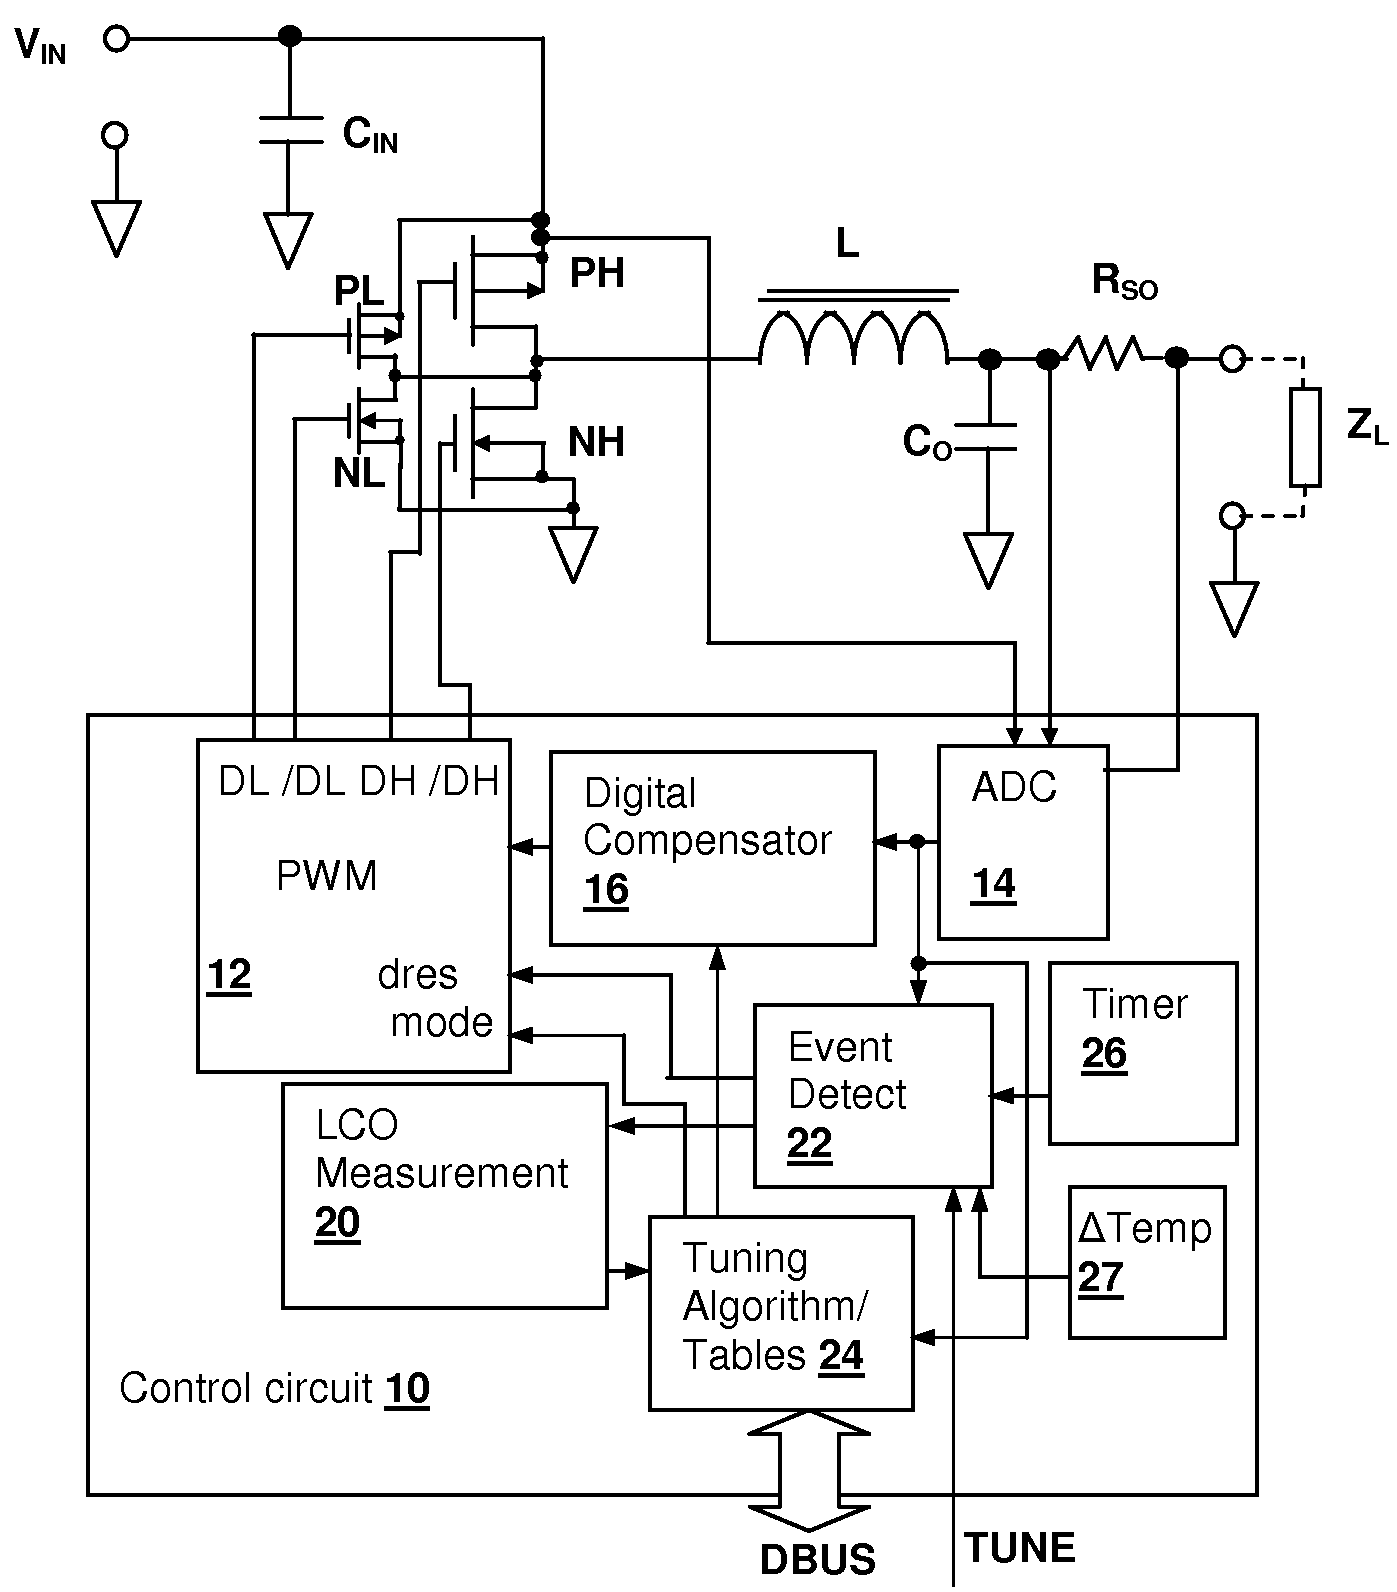 Switch-mode power supply (SMPS) with auto-tuning using limit-cycle oscillation response evaluation